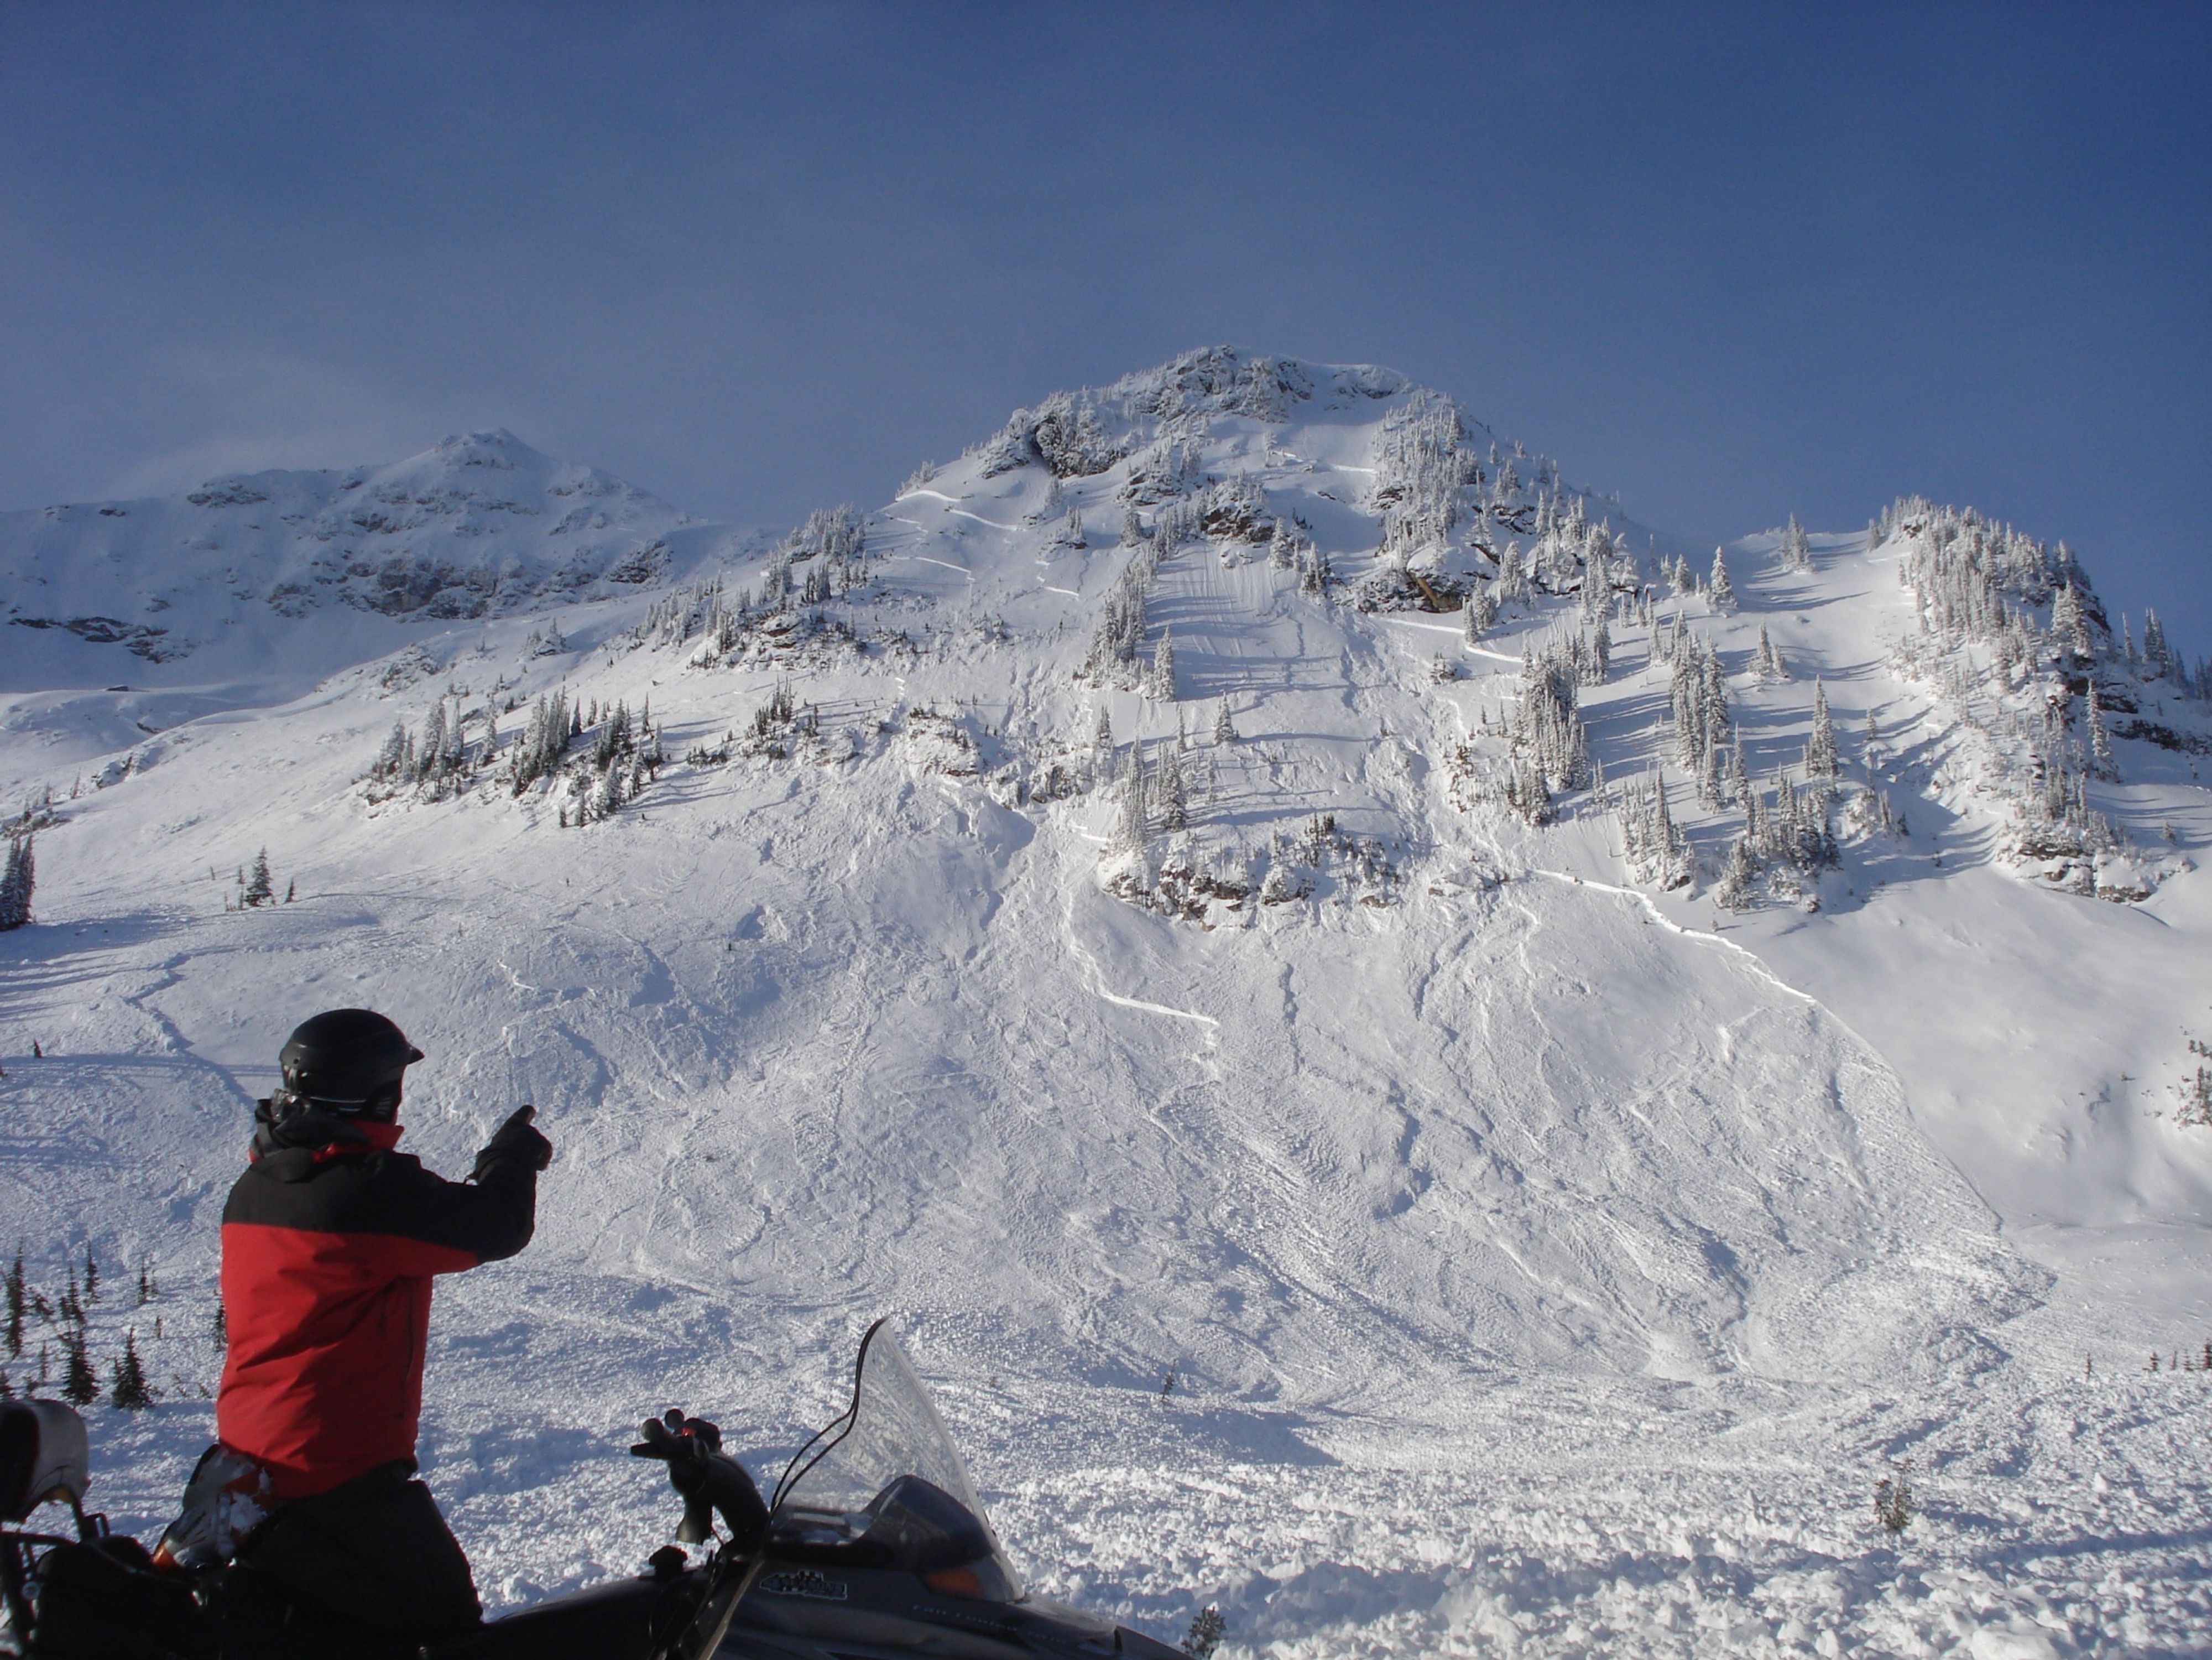 Natural avalanche activity is a sign that human-triggered avalanches are more likely.